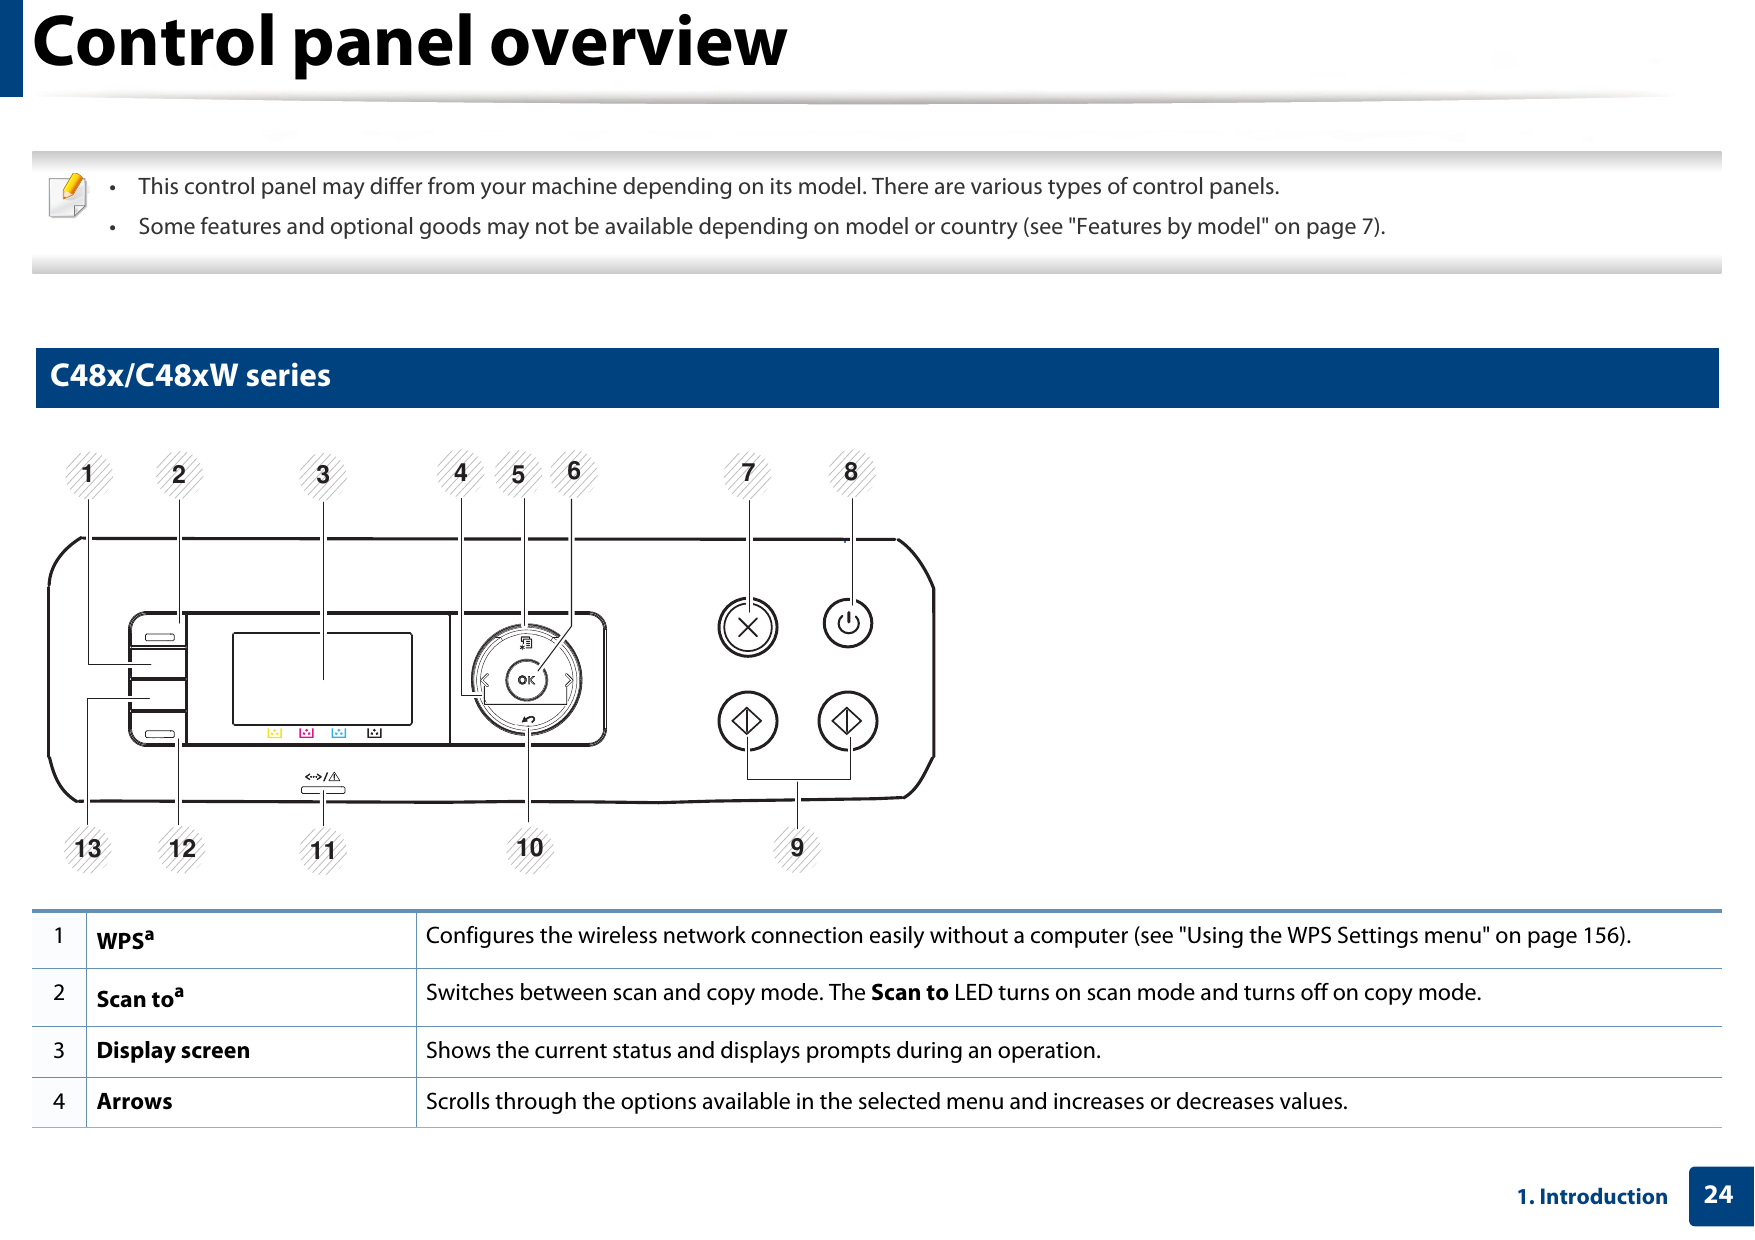 241. IntroductionControl panel overview • This control panel may differ from your machine depending on its model. There are various types of control panels.• Some features and optional goods may not be available depending on model or country (see &quot;Features by model&quot; on page 7). 12 C48x/C48xW series 1WPSaConfigures the wireless network connection easily without a computer (see &quot;Using the WPS Settings menu&quot; on page 156).2Scan toaSwitches between scan and copy mode. The Scan to LED turns on scan mode and turns off on copy mode.3Display screen Shows the current status and displays prompts during an operation.4Arrows Scrolls through the options available in the selected menu and increases or decreases values. 2 1  3  5  6  7  8 9 10 11 13  12 4